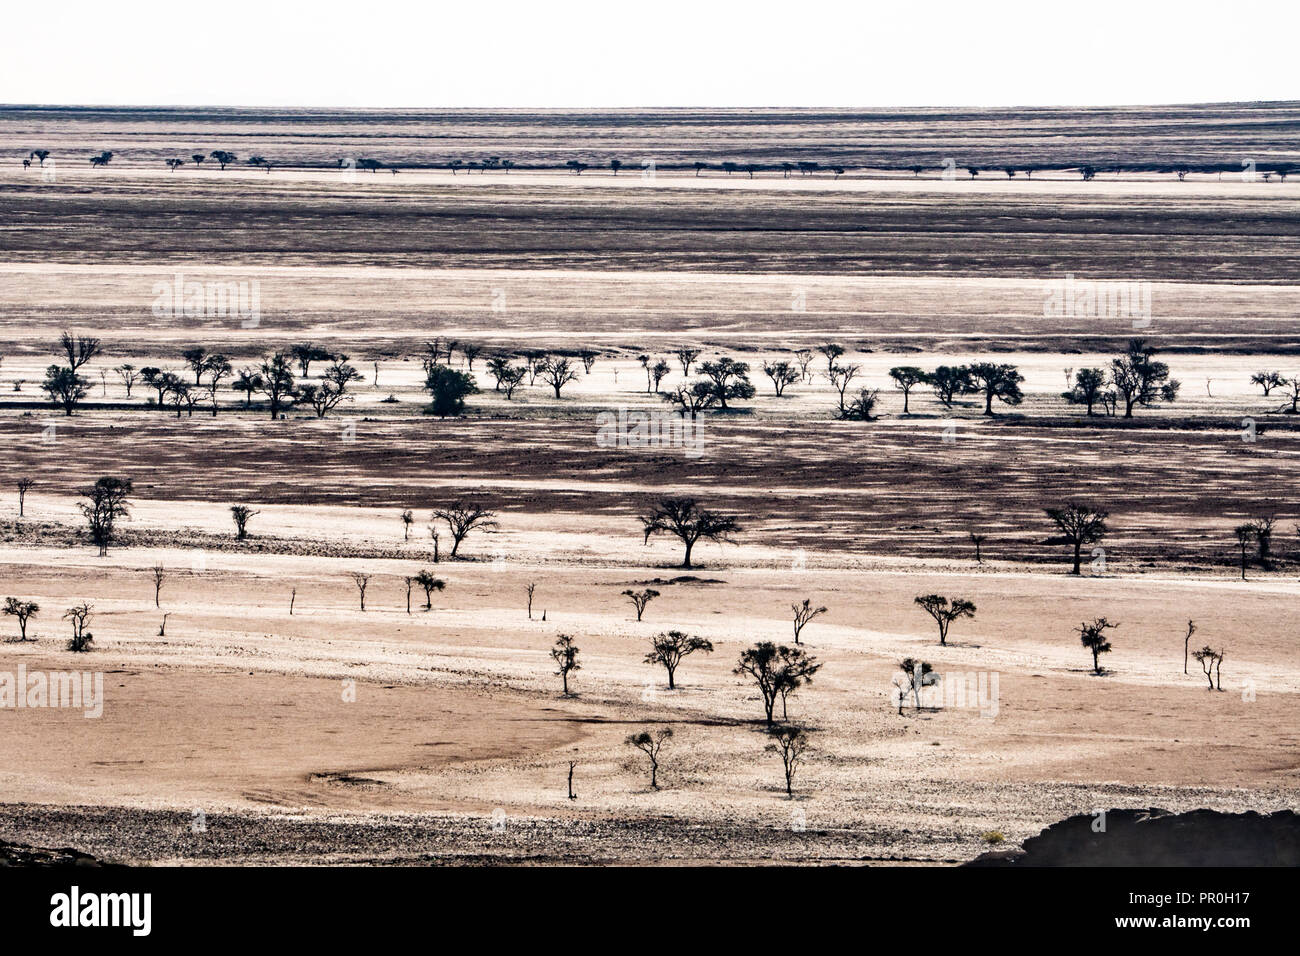 Layered landscape of plains punctuated by silhouetted dark trees, south of Walvis Bay, Namibia, Africa Stock Photo